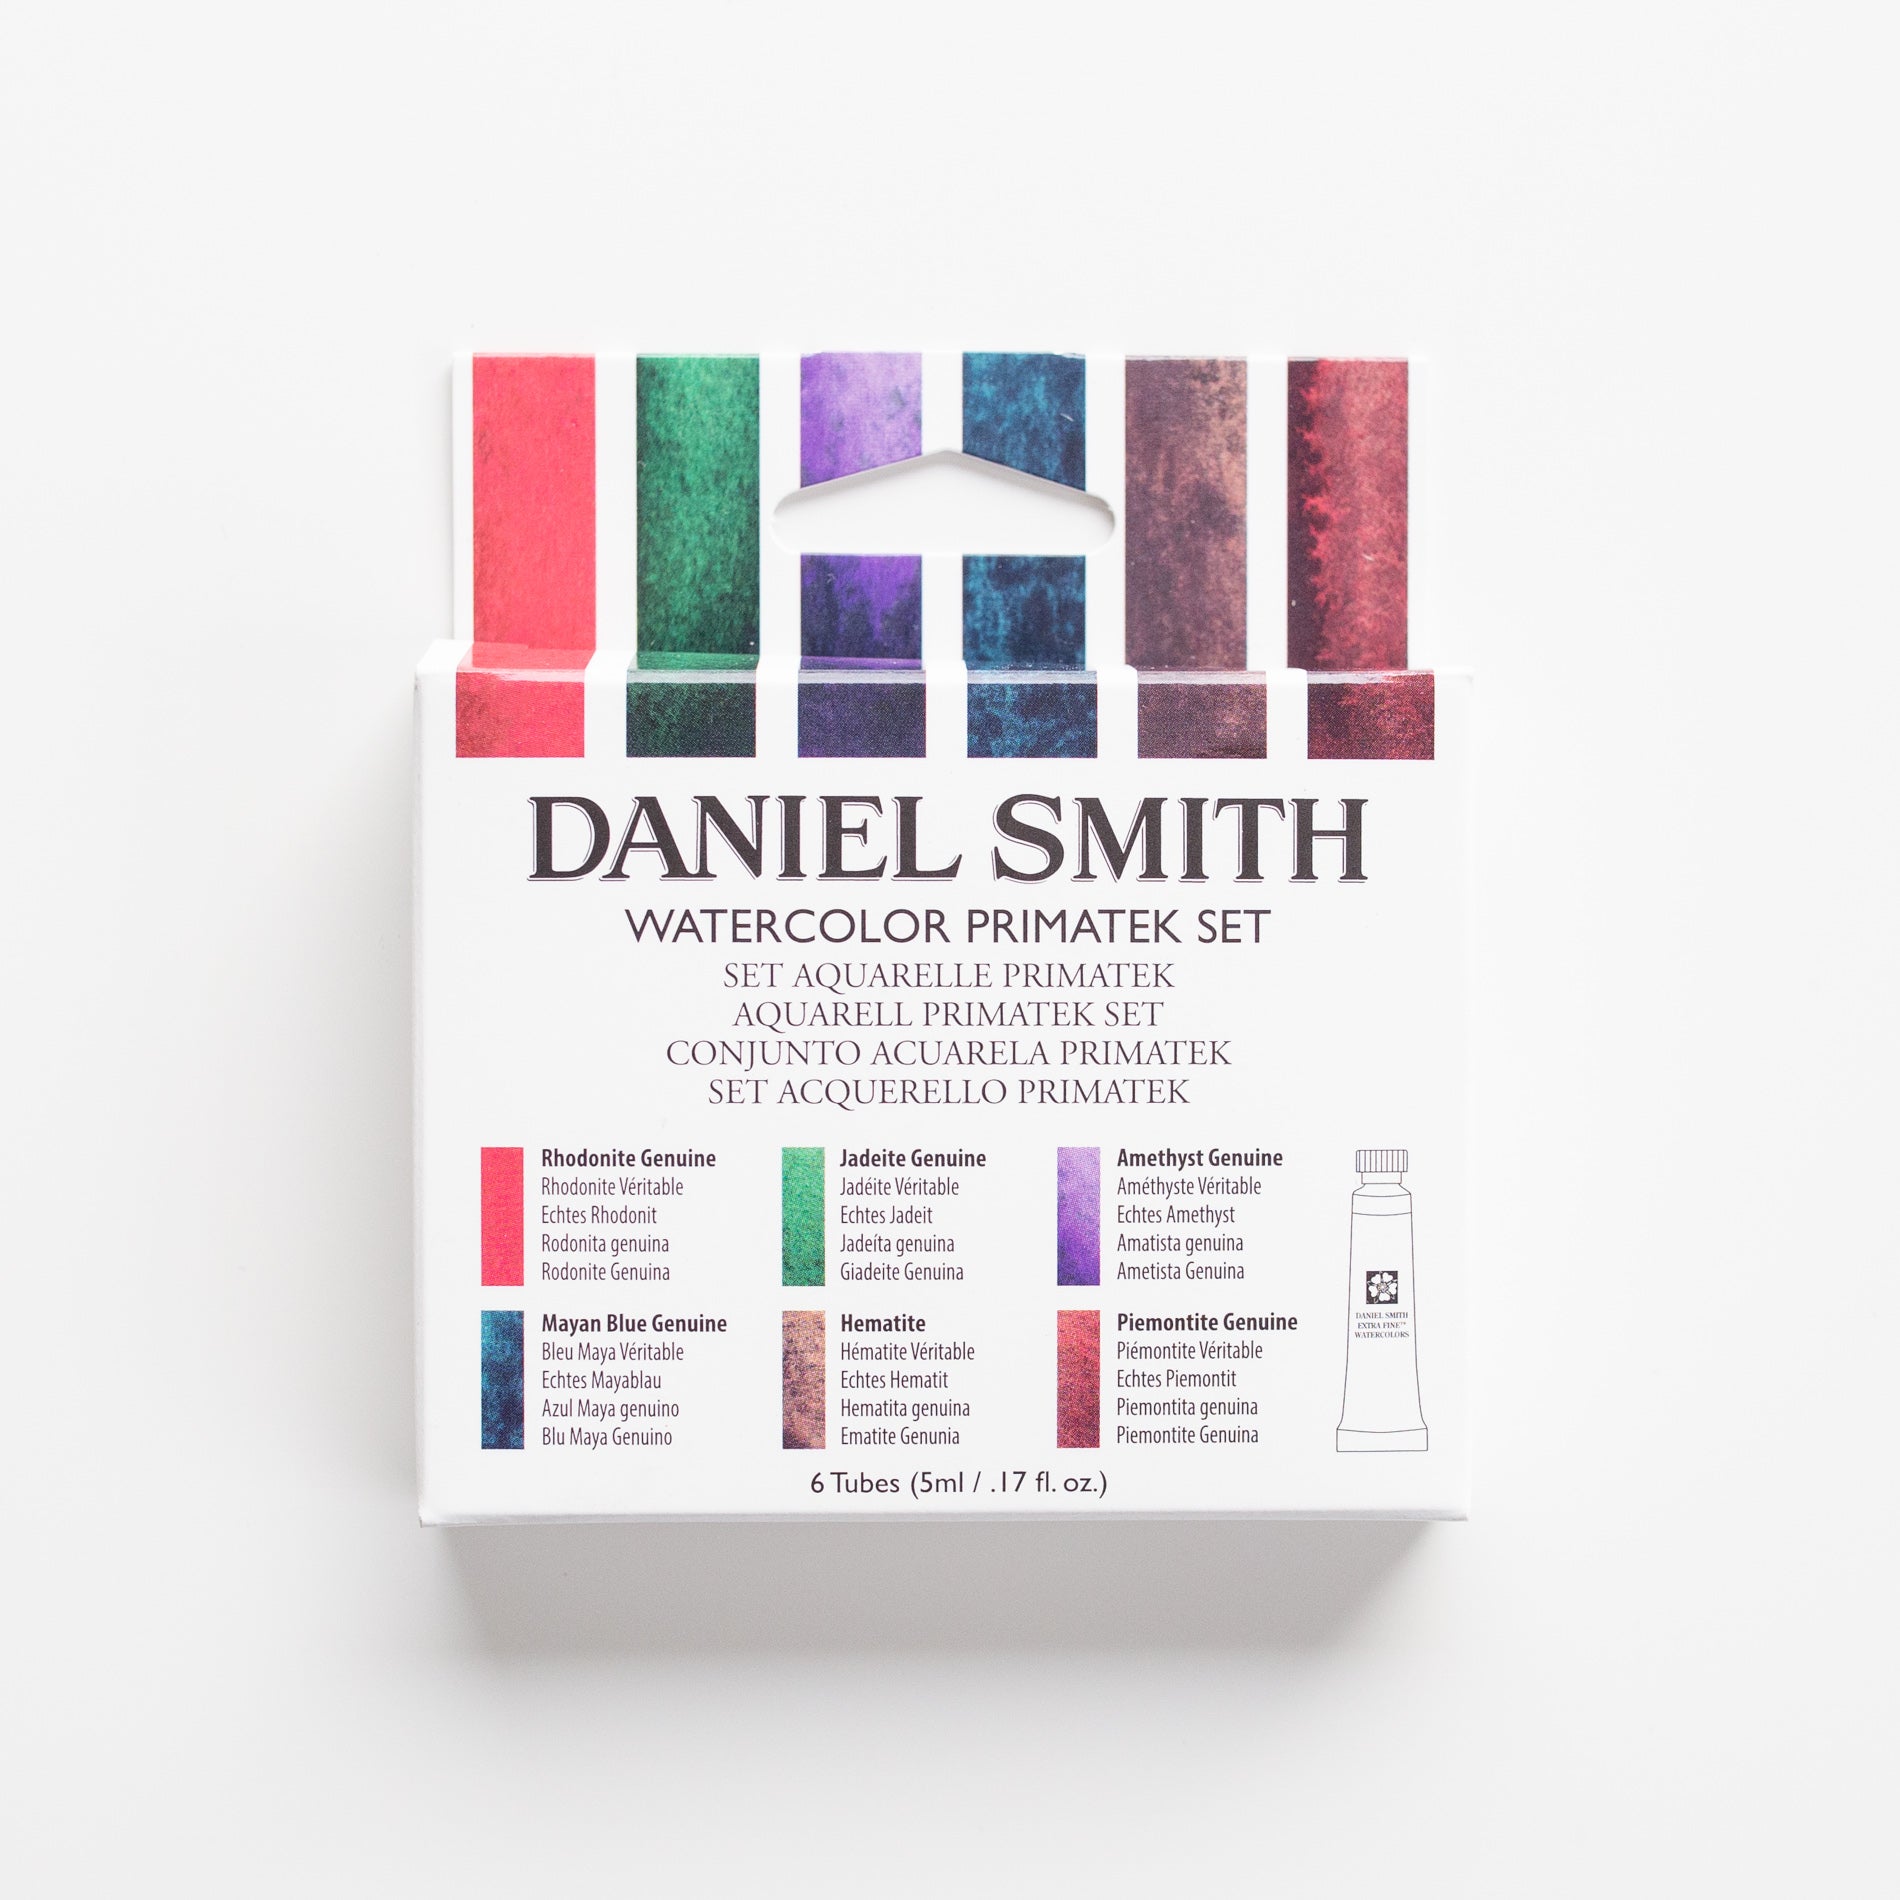 Daniel Smith Extra Fine Essentials Introductory Watercolor, 6 Tubes, 5ml -  Art By Masters